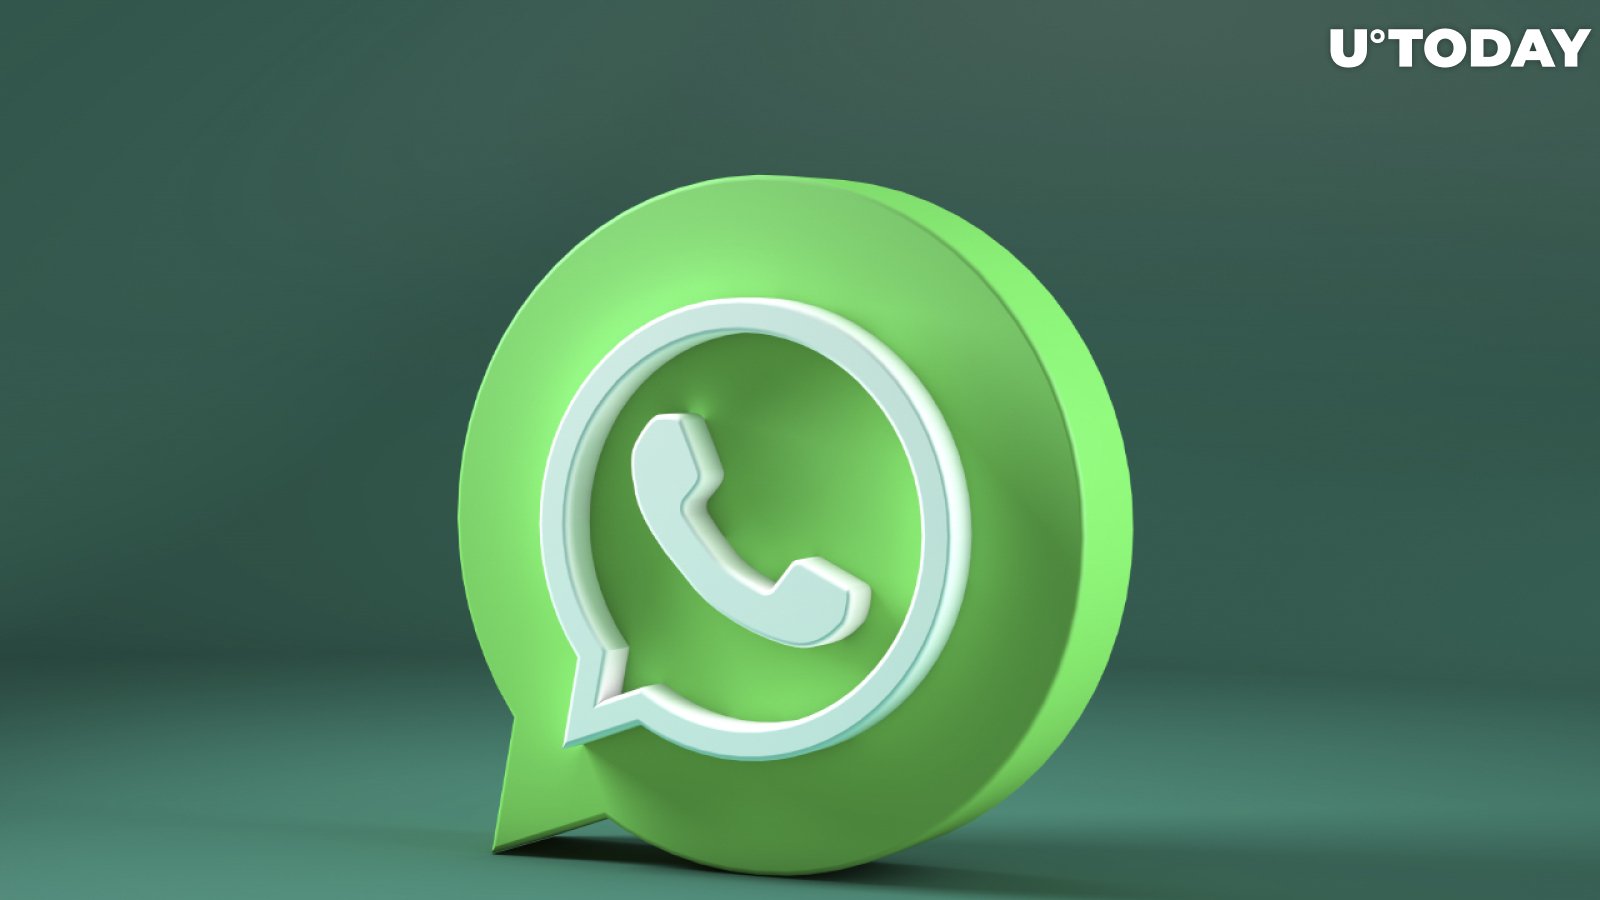 WhatsApp Implements Crypto Transactions